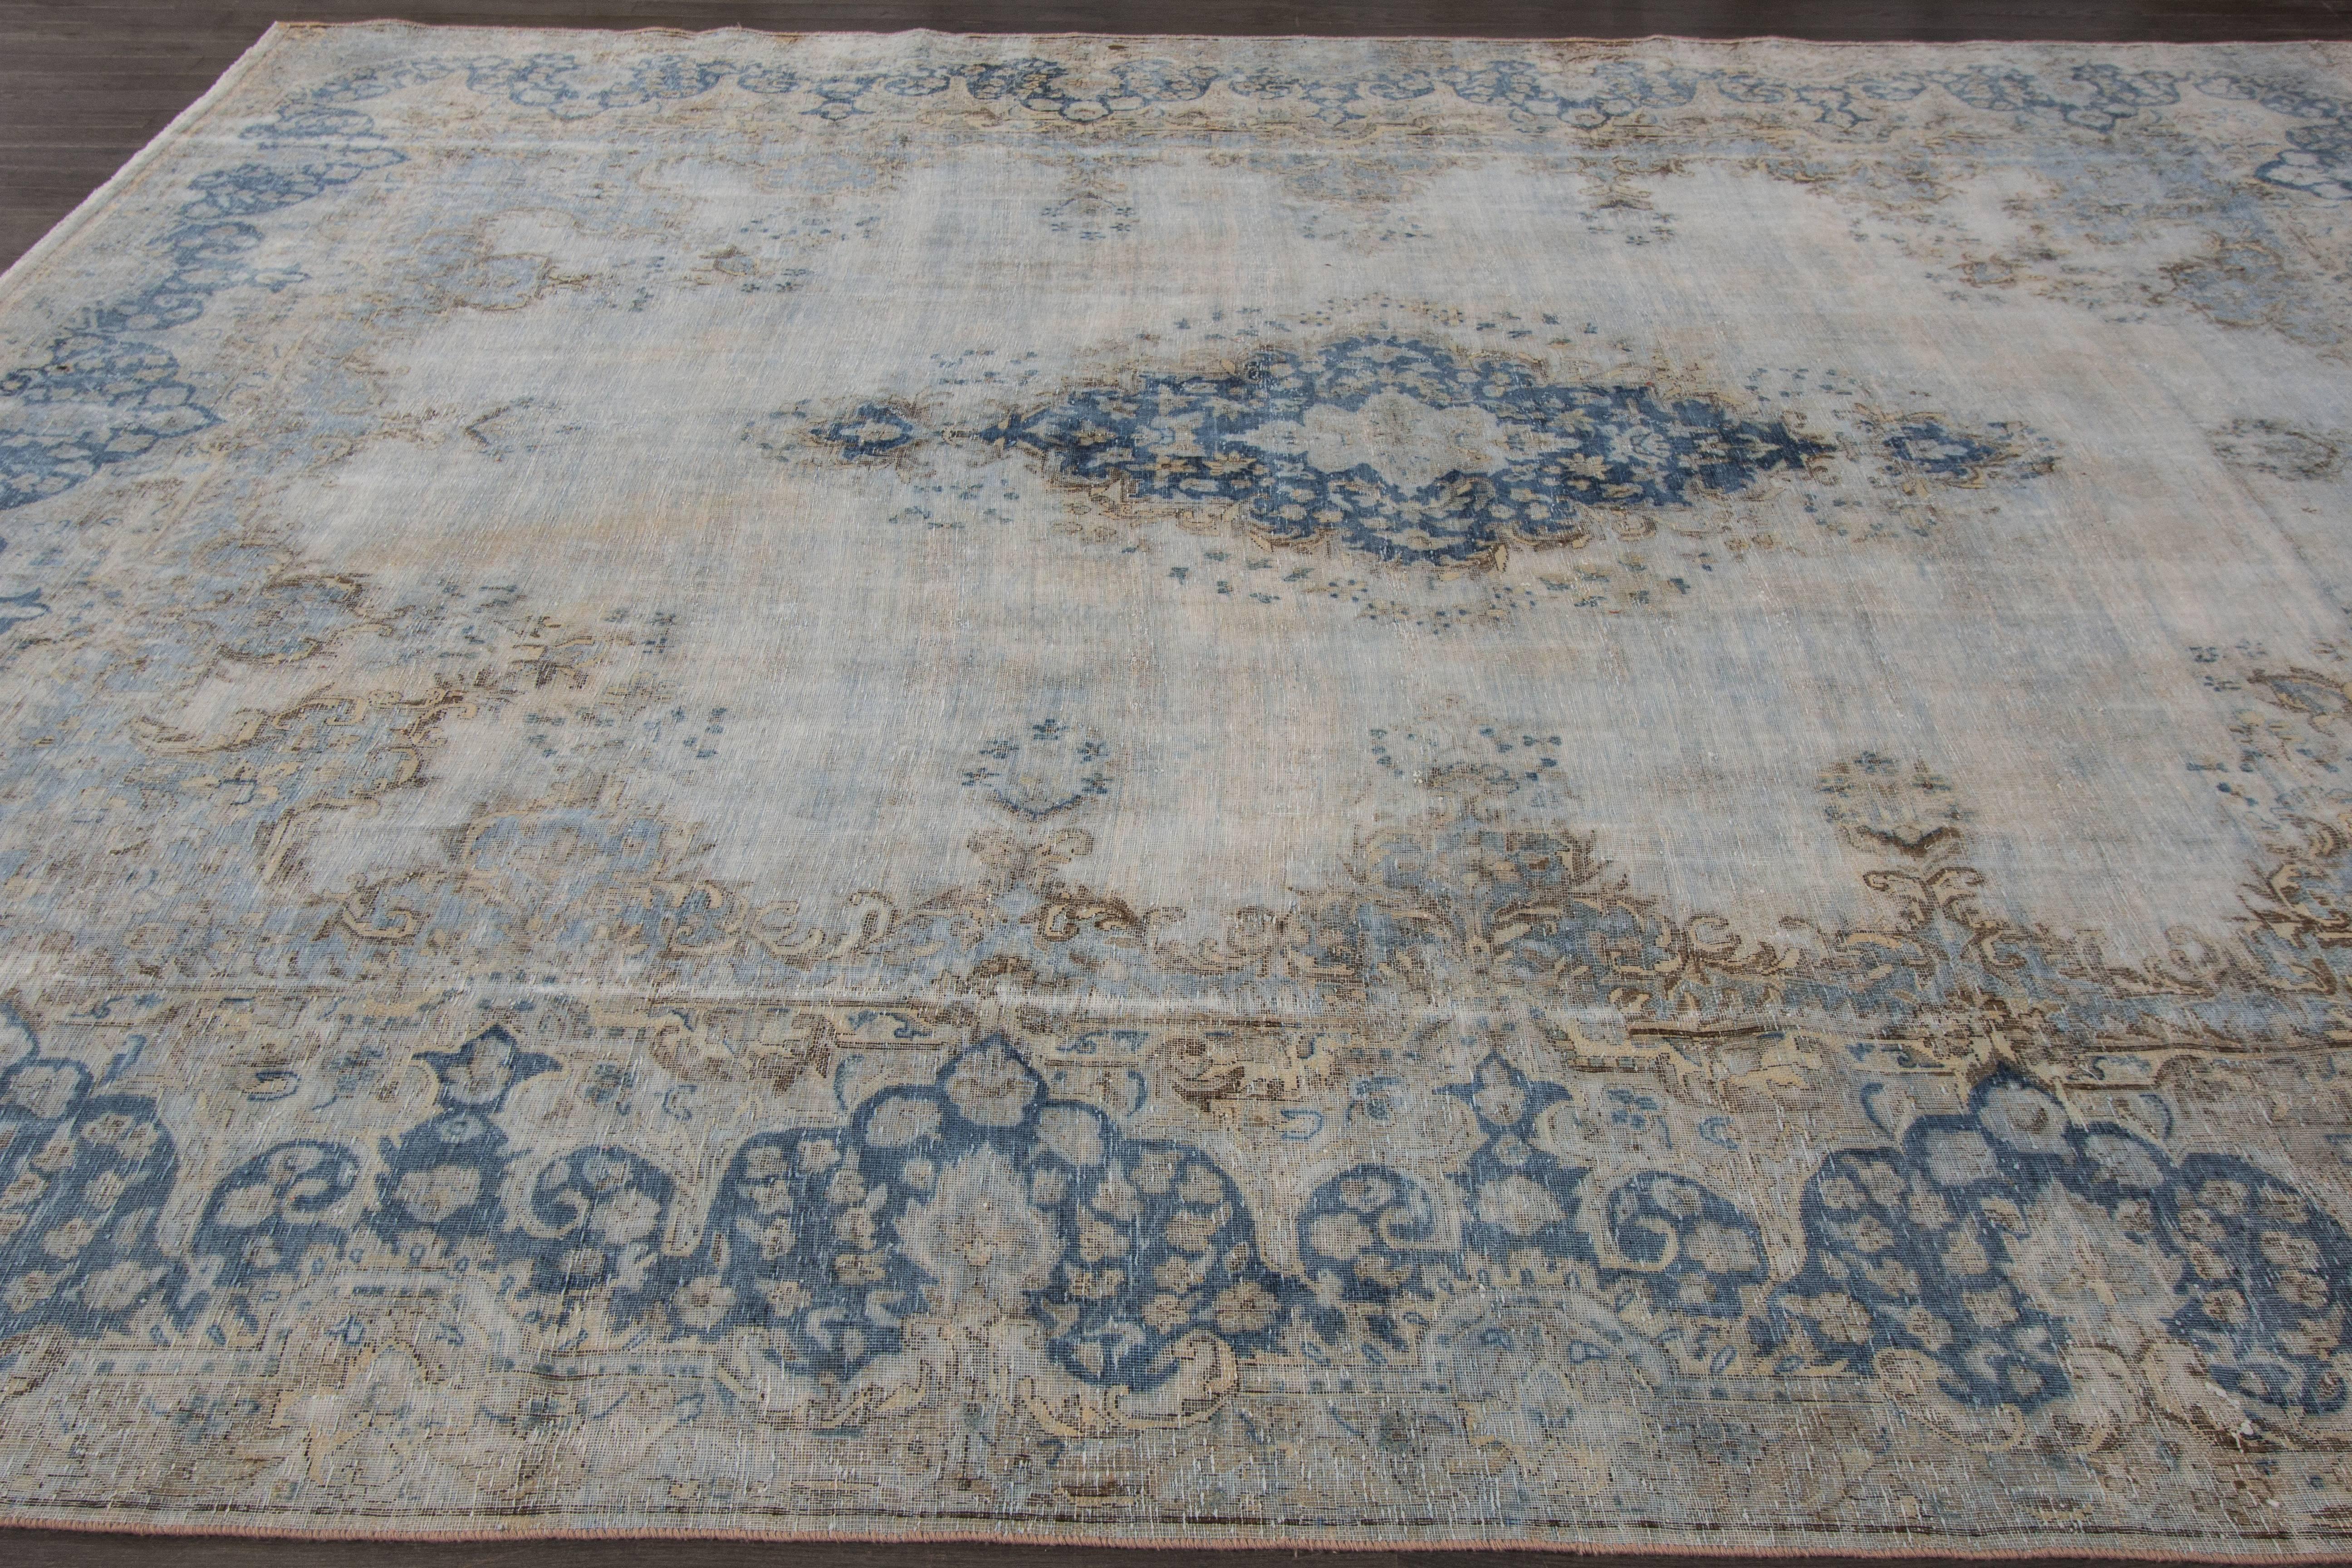 Measures: 9'.9 x 13'.1
This beautiful hand-knotted design rug will make your floor look splendid. This collection is made in wool.